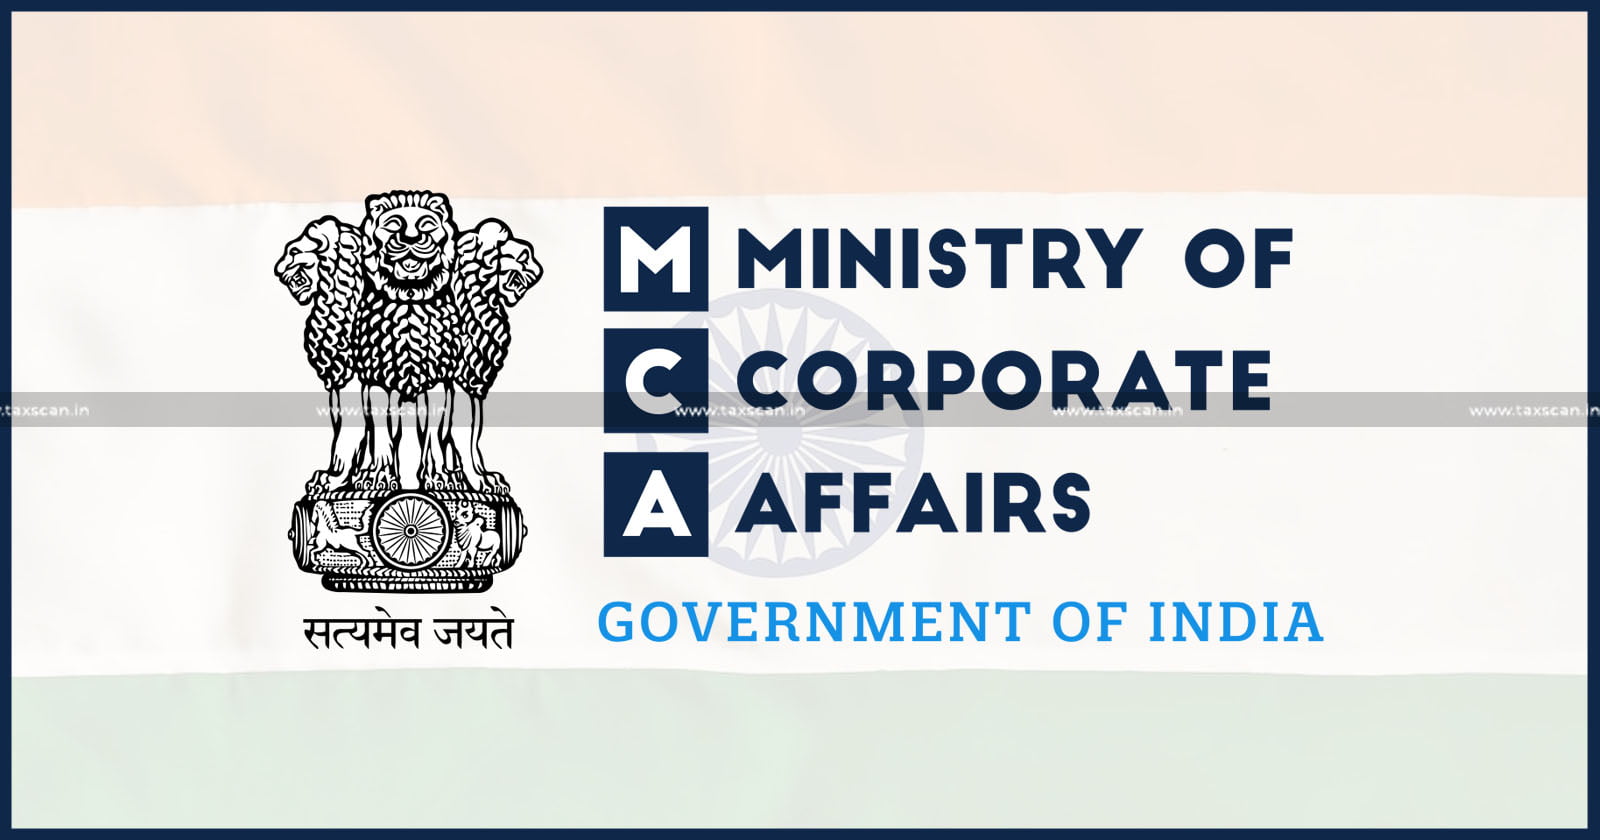 MCA - mergers - acquisitions - companies act - MCA mergers - mergers and acquisitions - approval of mergers and acquisitions under companies act - Taxscan